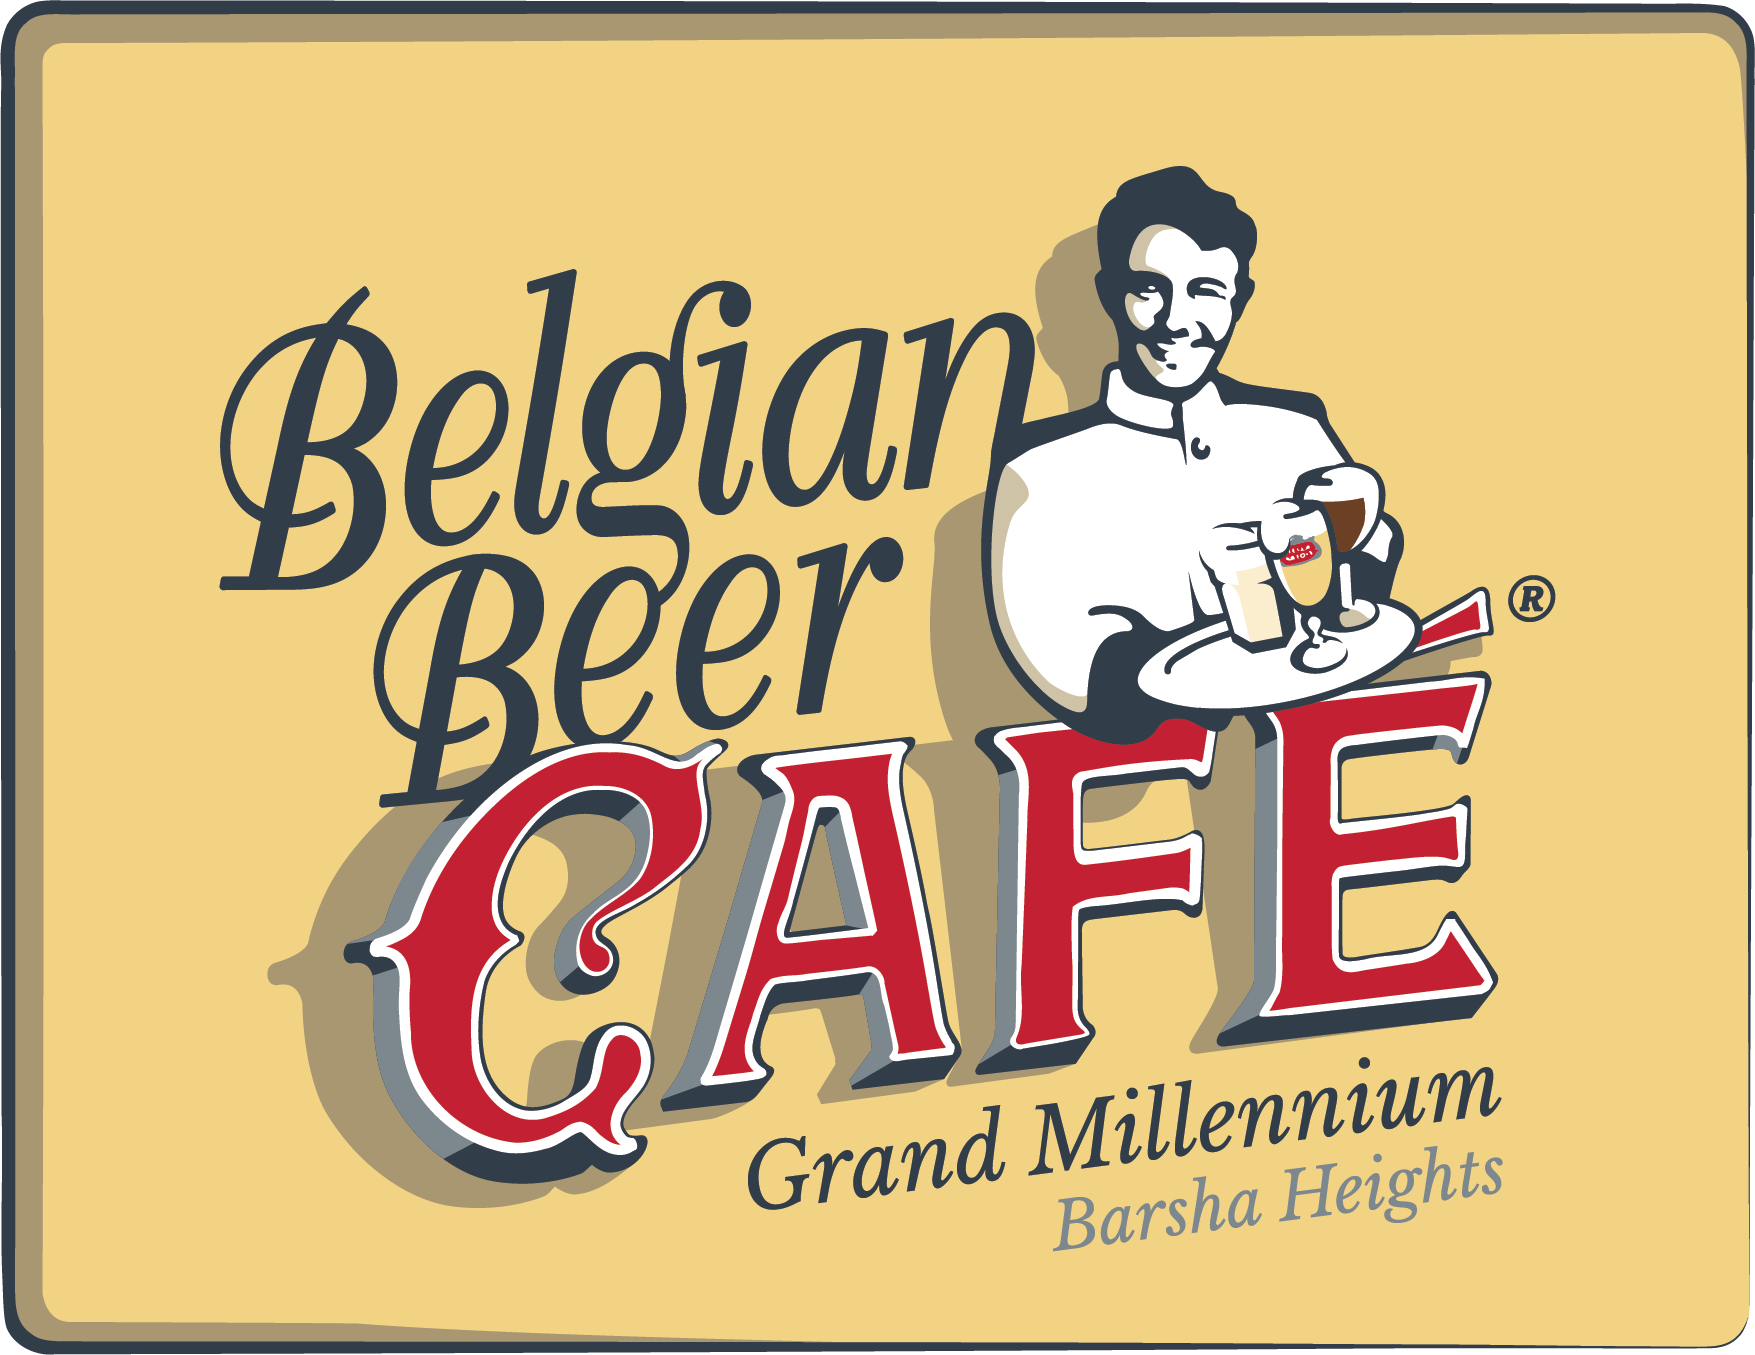 Belgian Beer Cafe? - Delicious food, beer and sports in a unique ambience.